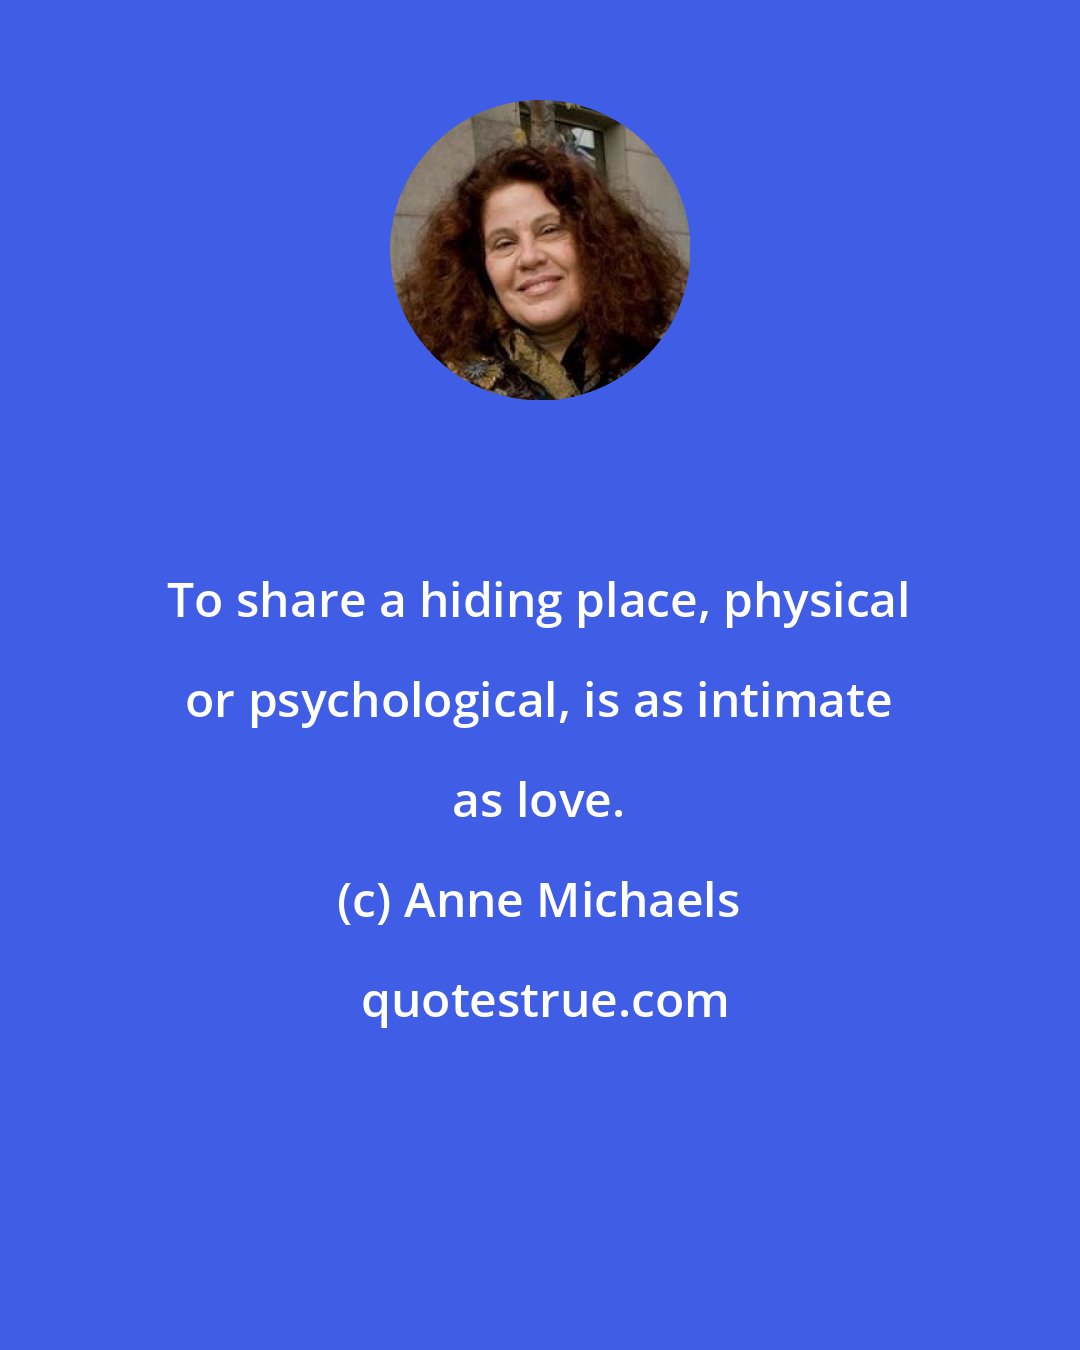 Anne Michaels: To share a hiding place, physical or psychological, is as intimate as love.